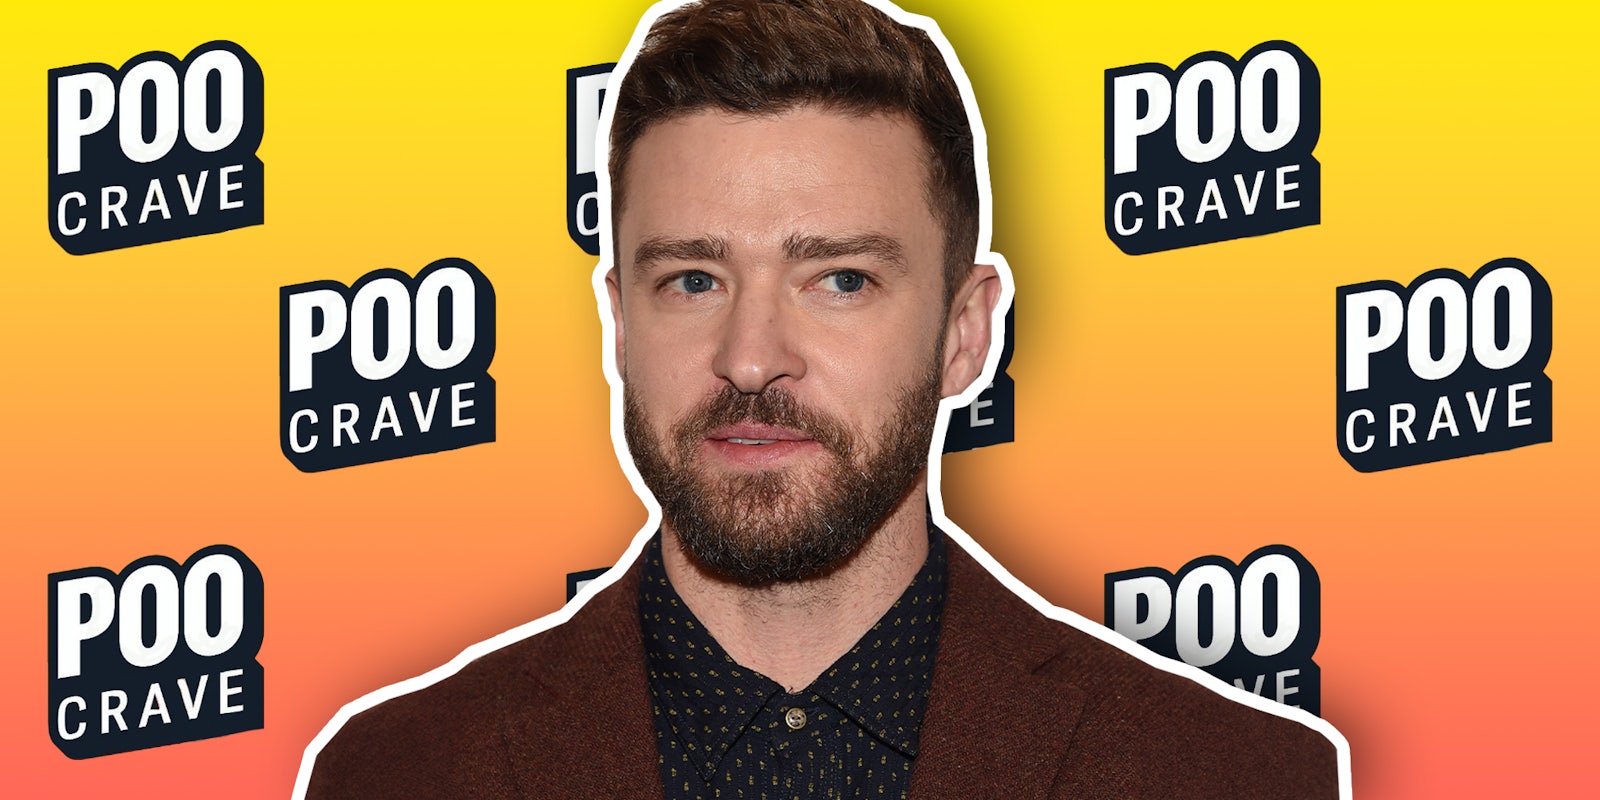 'Poo Crave' misinfo trends about Justin Timberlake